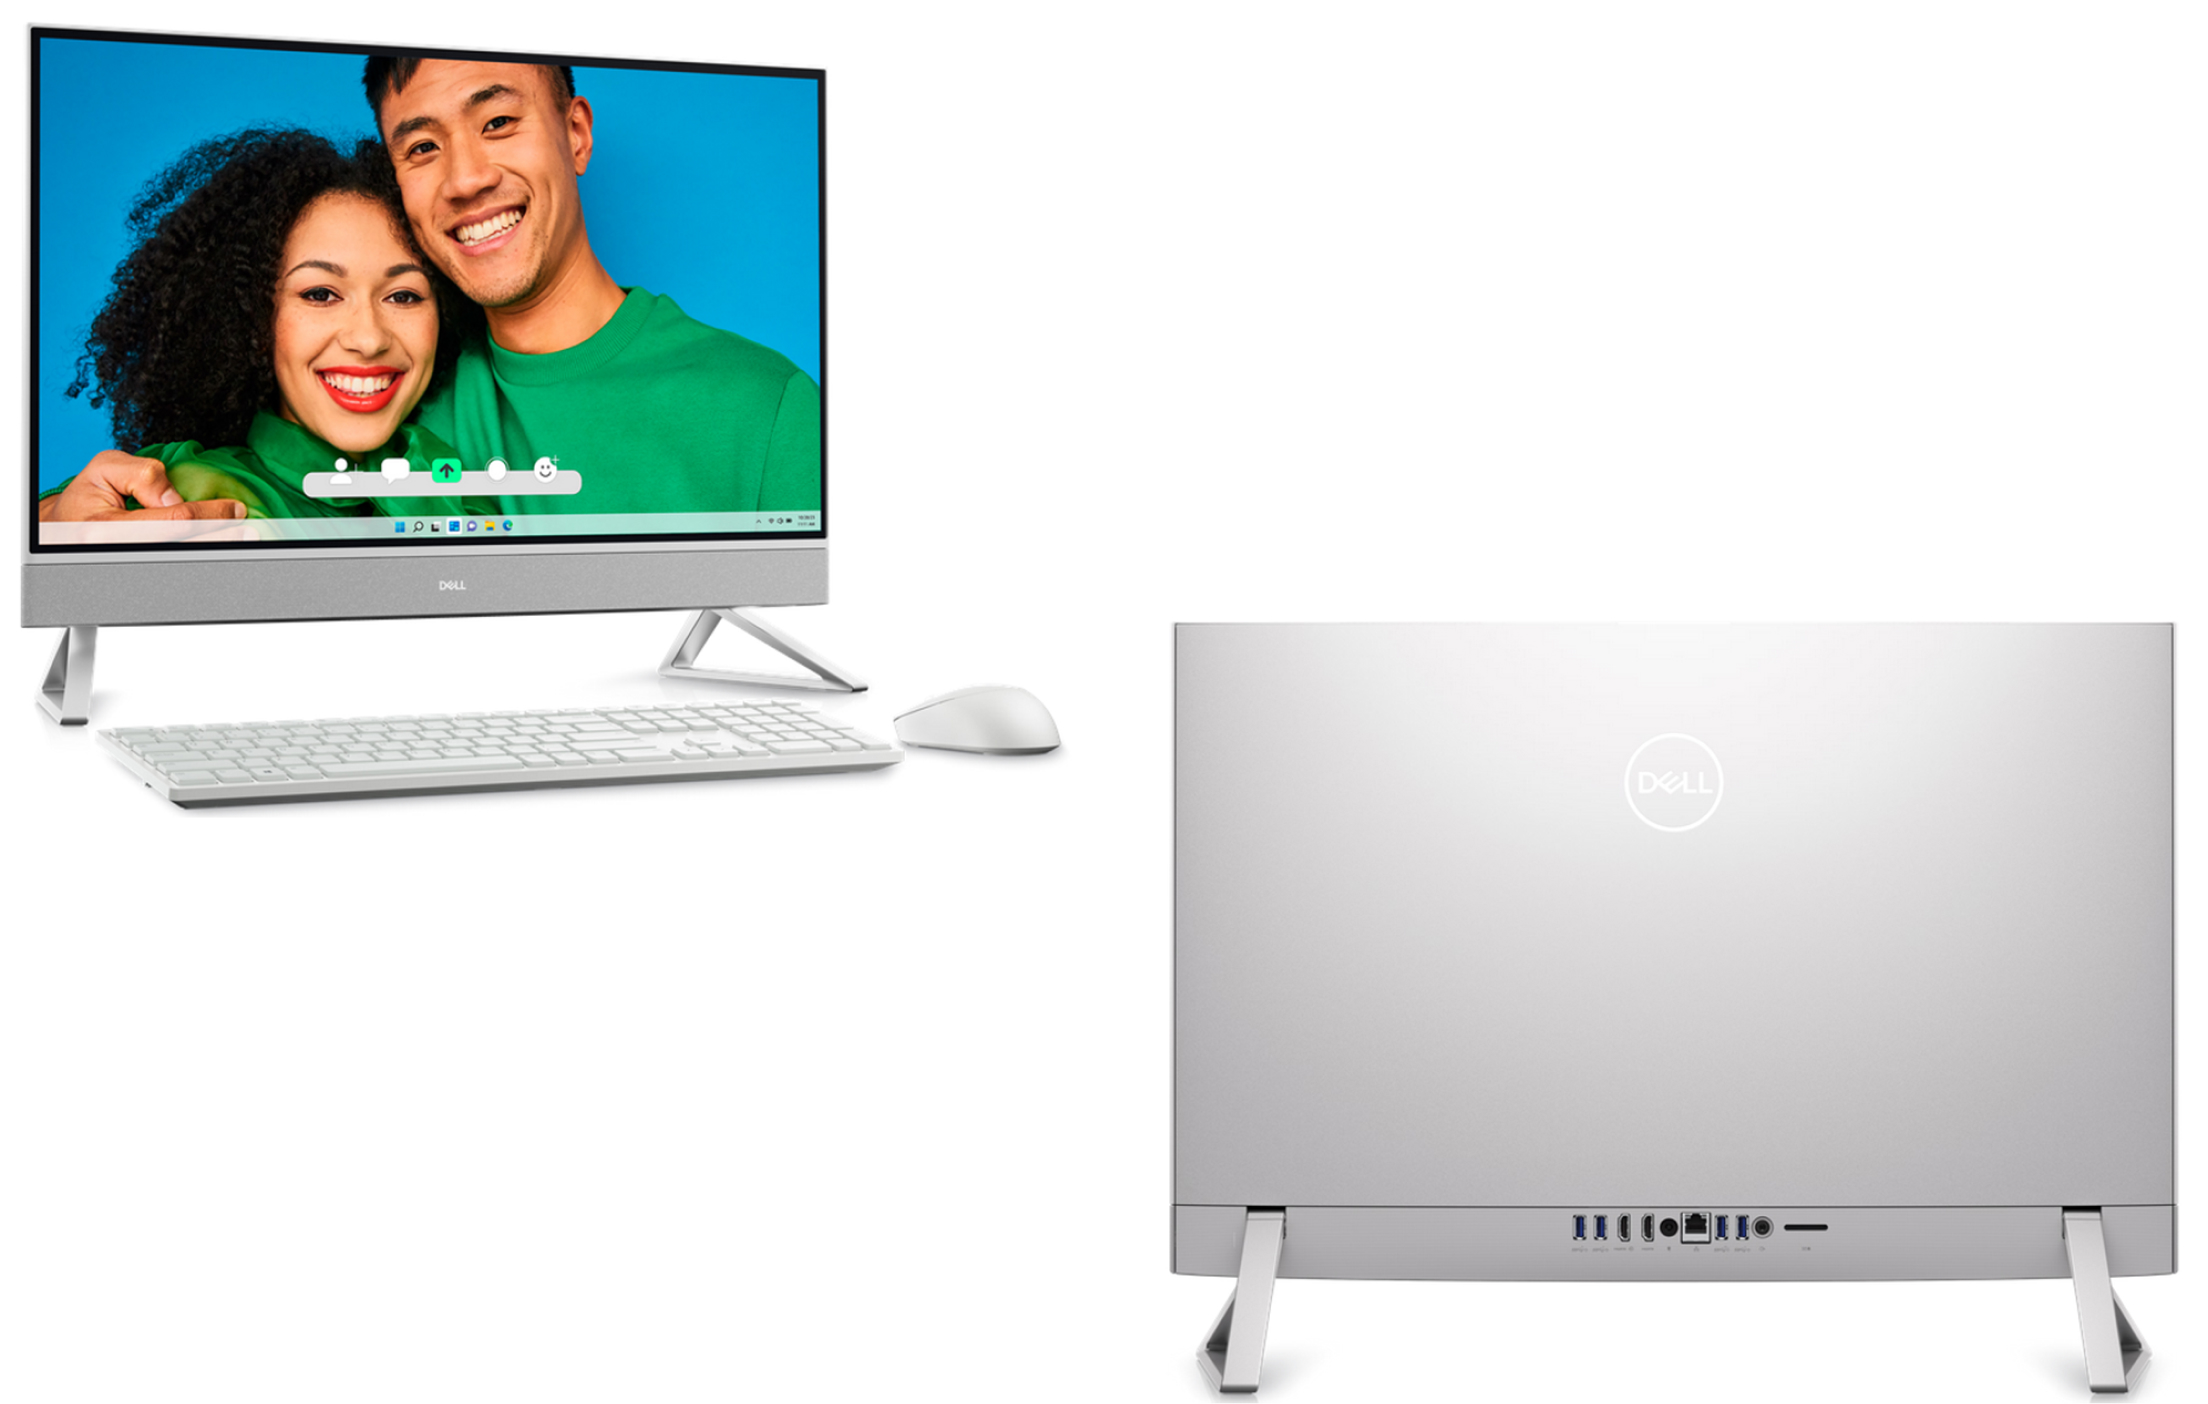 buy-inspiron-27-all-in-one-at-the-highest-discount-on-cyber-monday